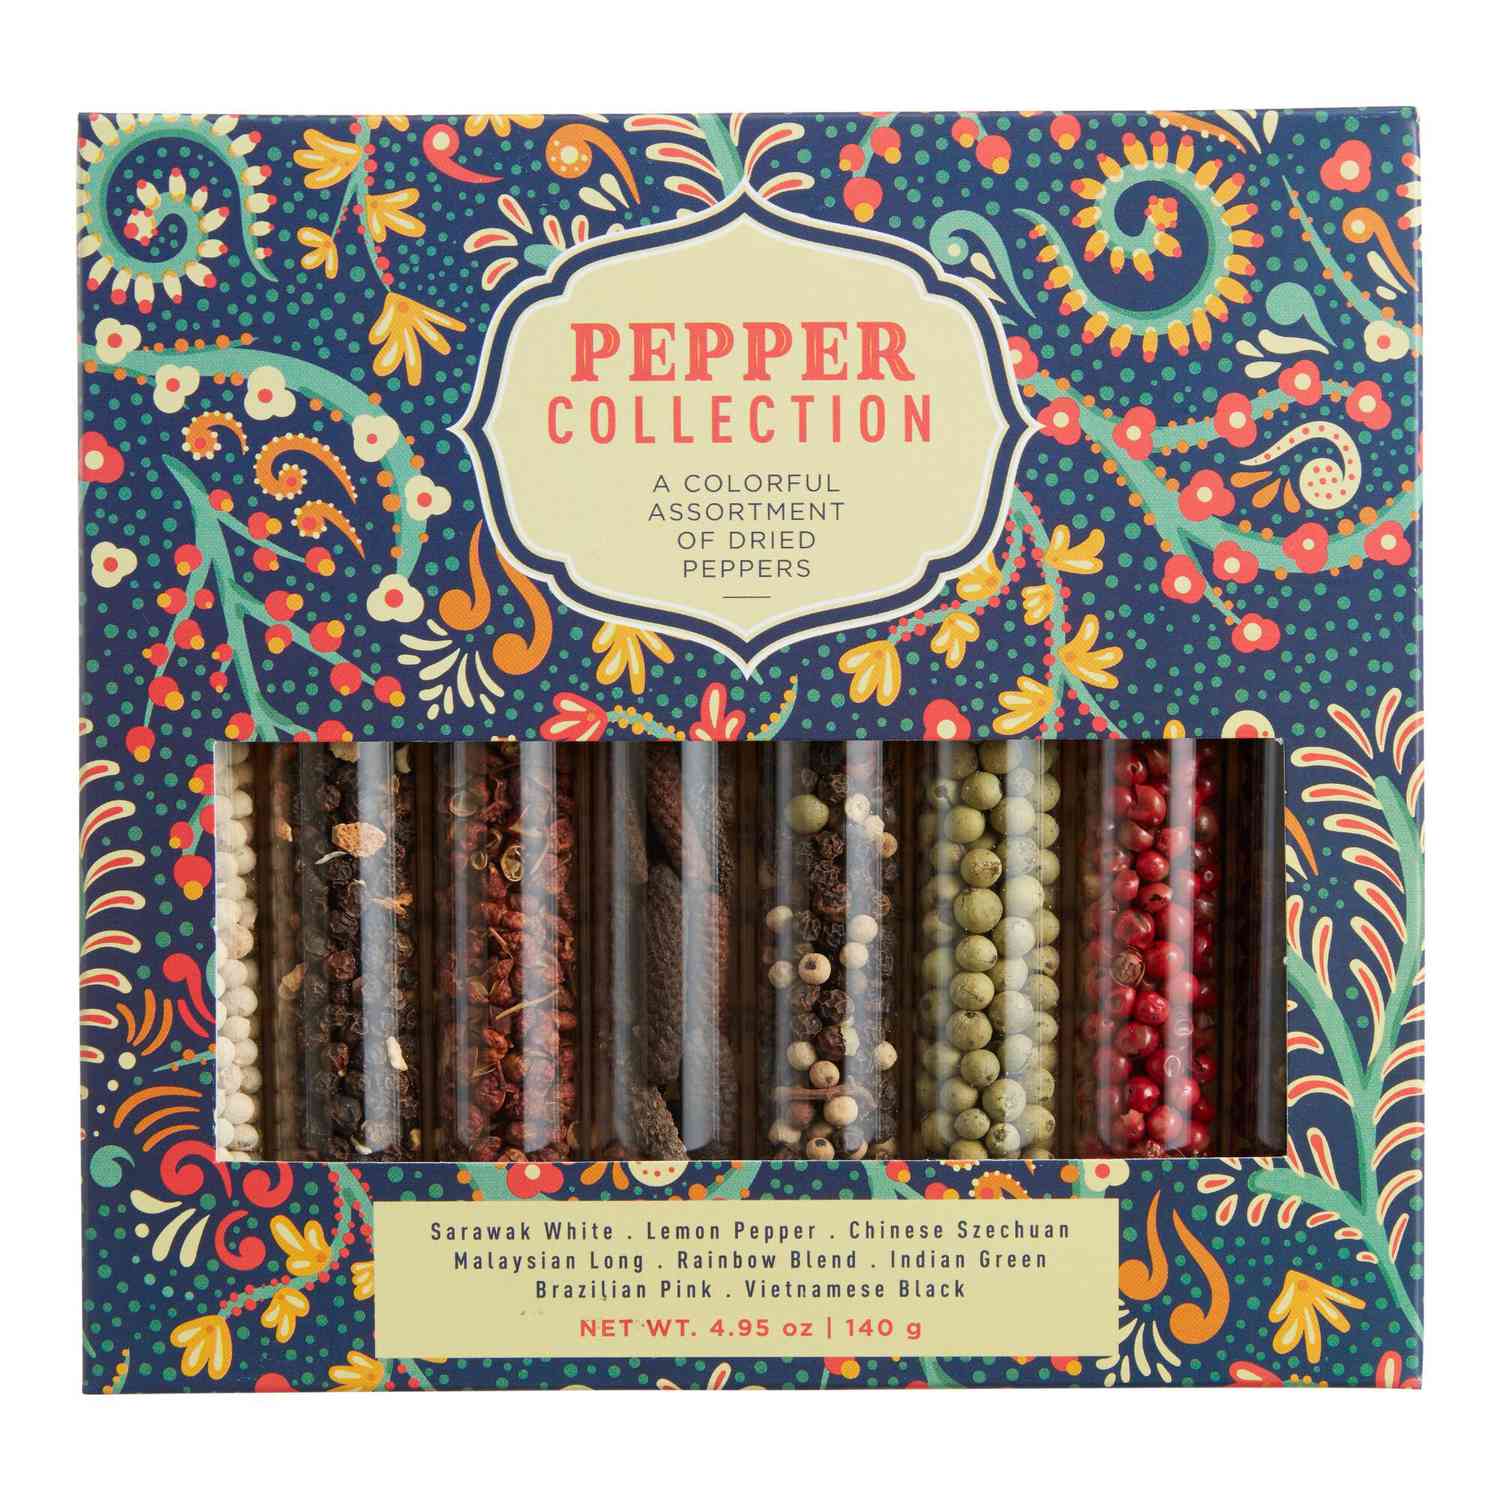 gift set of different kinds of whole peppercorn from around the world